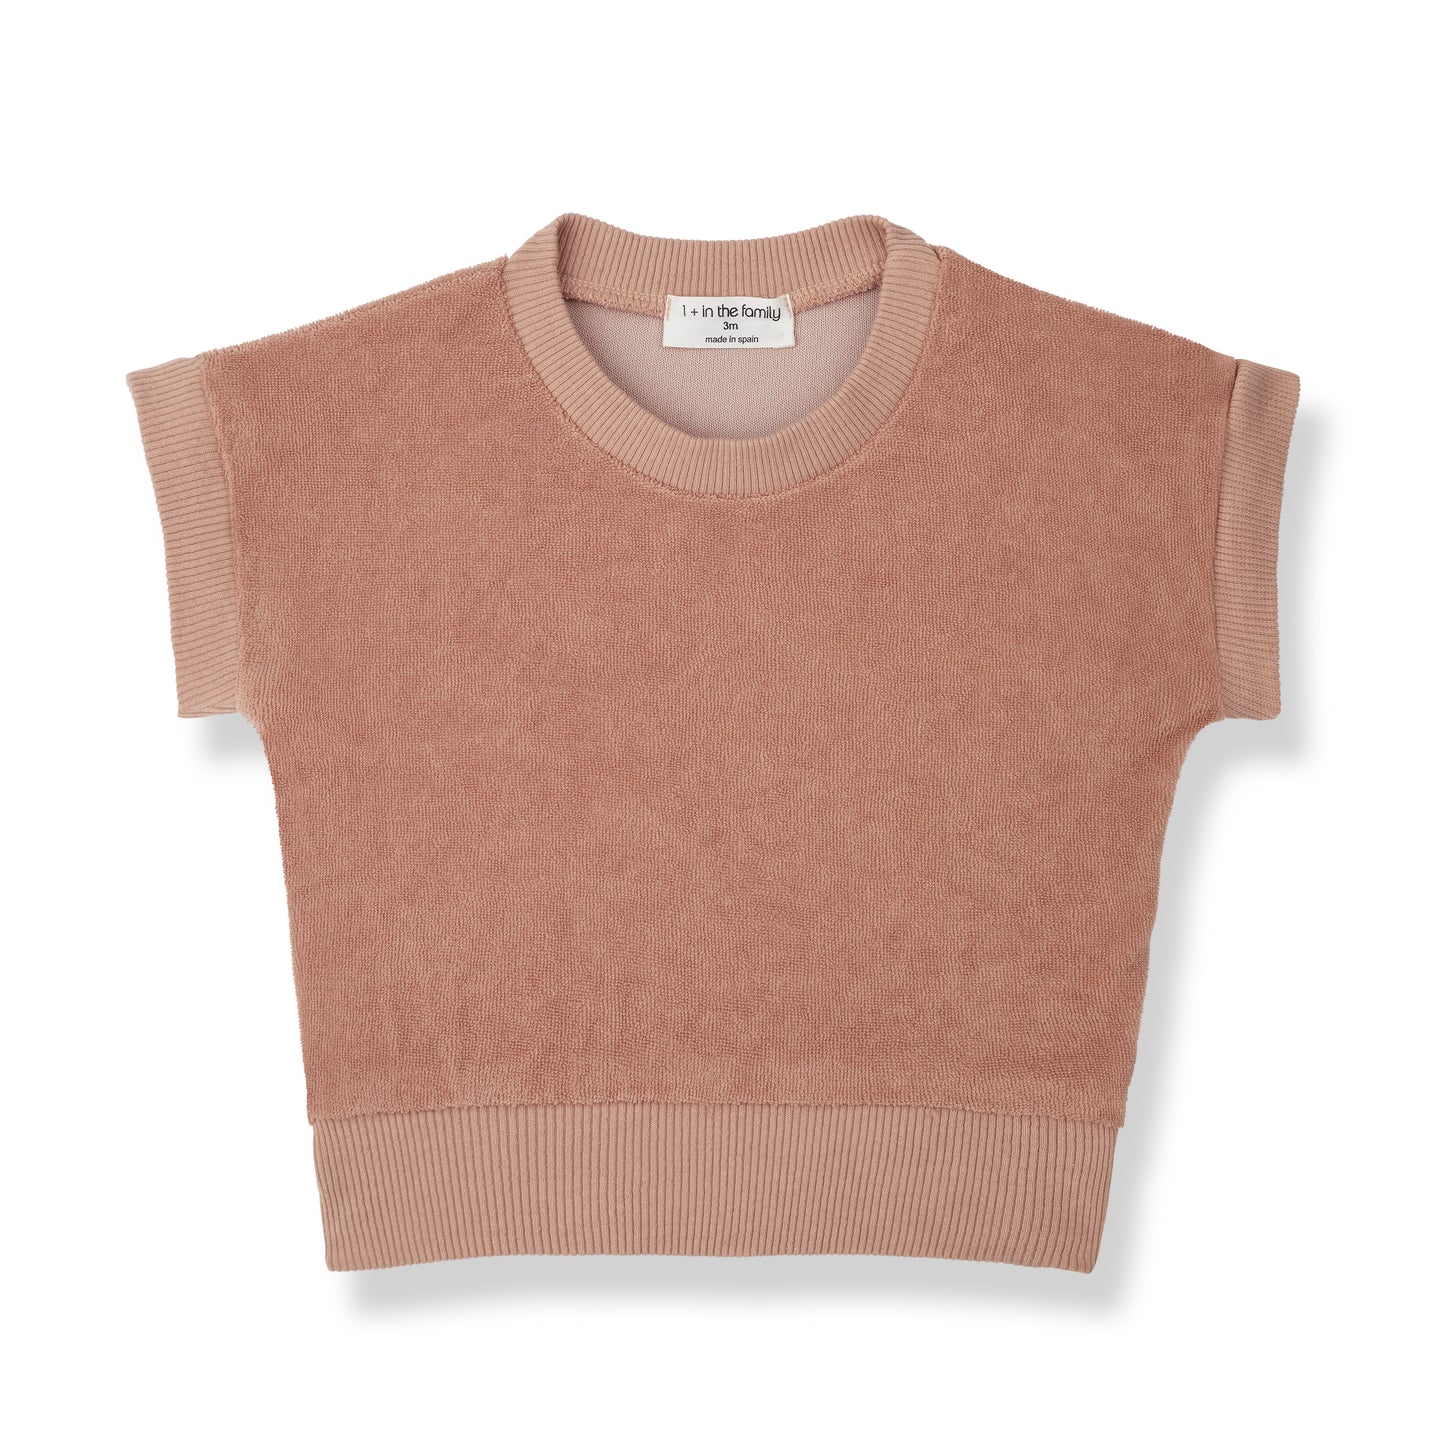 1 + IN THE FAMILY APRICOT SS TEE